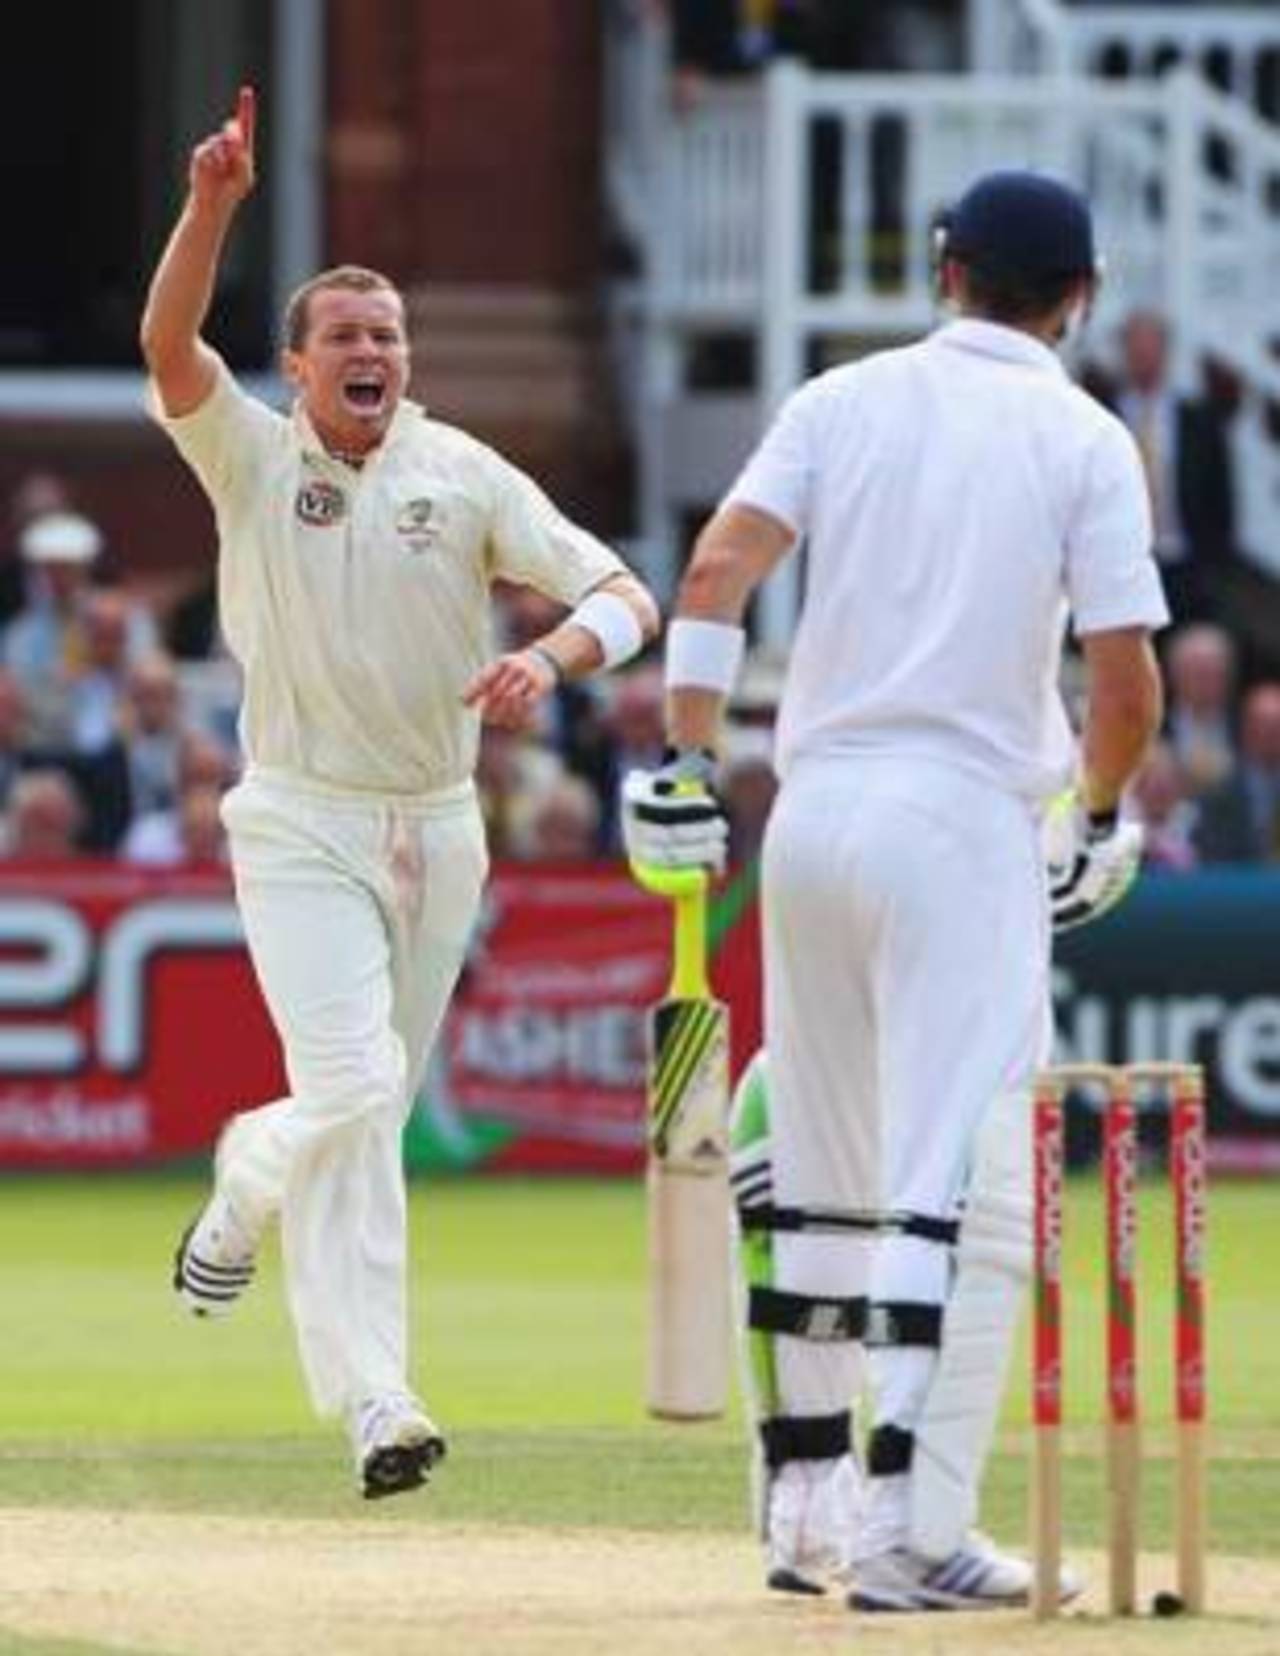 Peter Siddle was rewarded with Kevin Pietersen's wicket, England v Australia, 2nd Test, Lord's, 3rd day, July 18, 2009